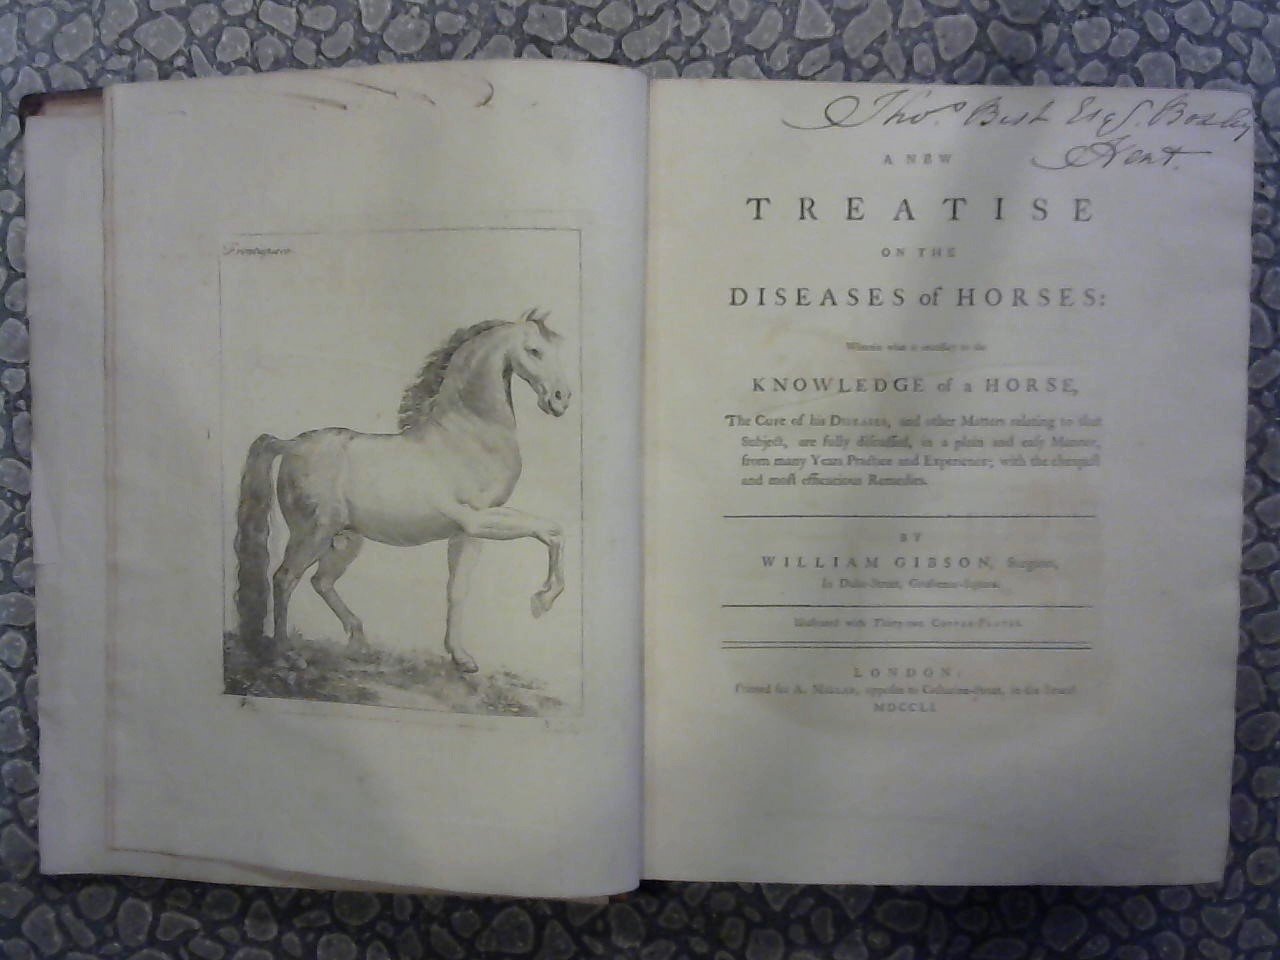 Gibson William - A New Treatise on the diseases of Horses, Wherein what is necessary to the Knowledge of a Horse